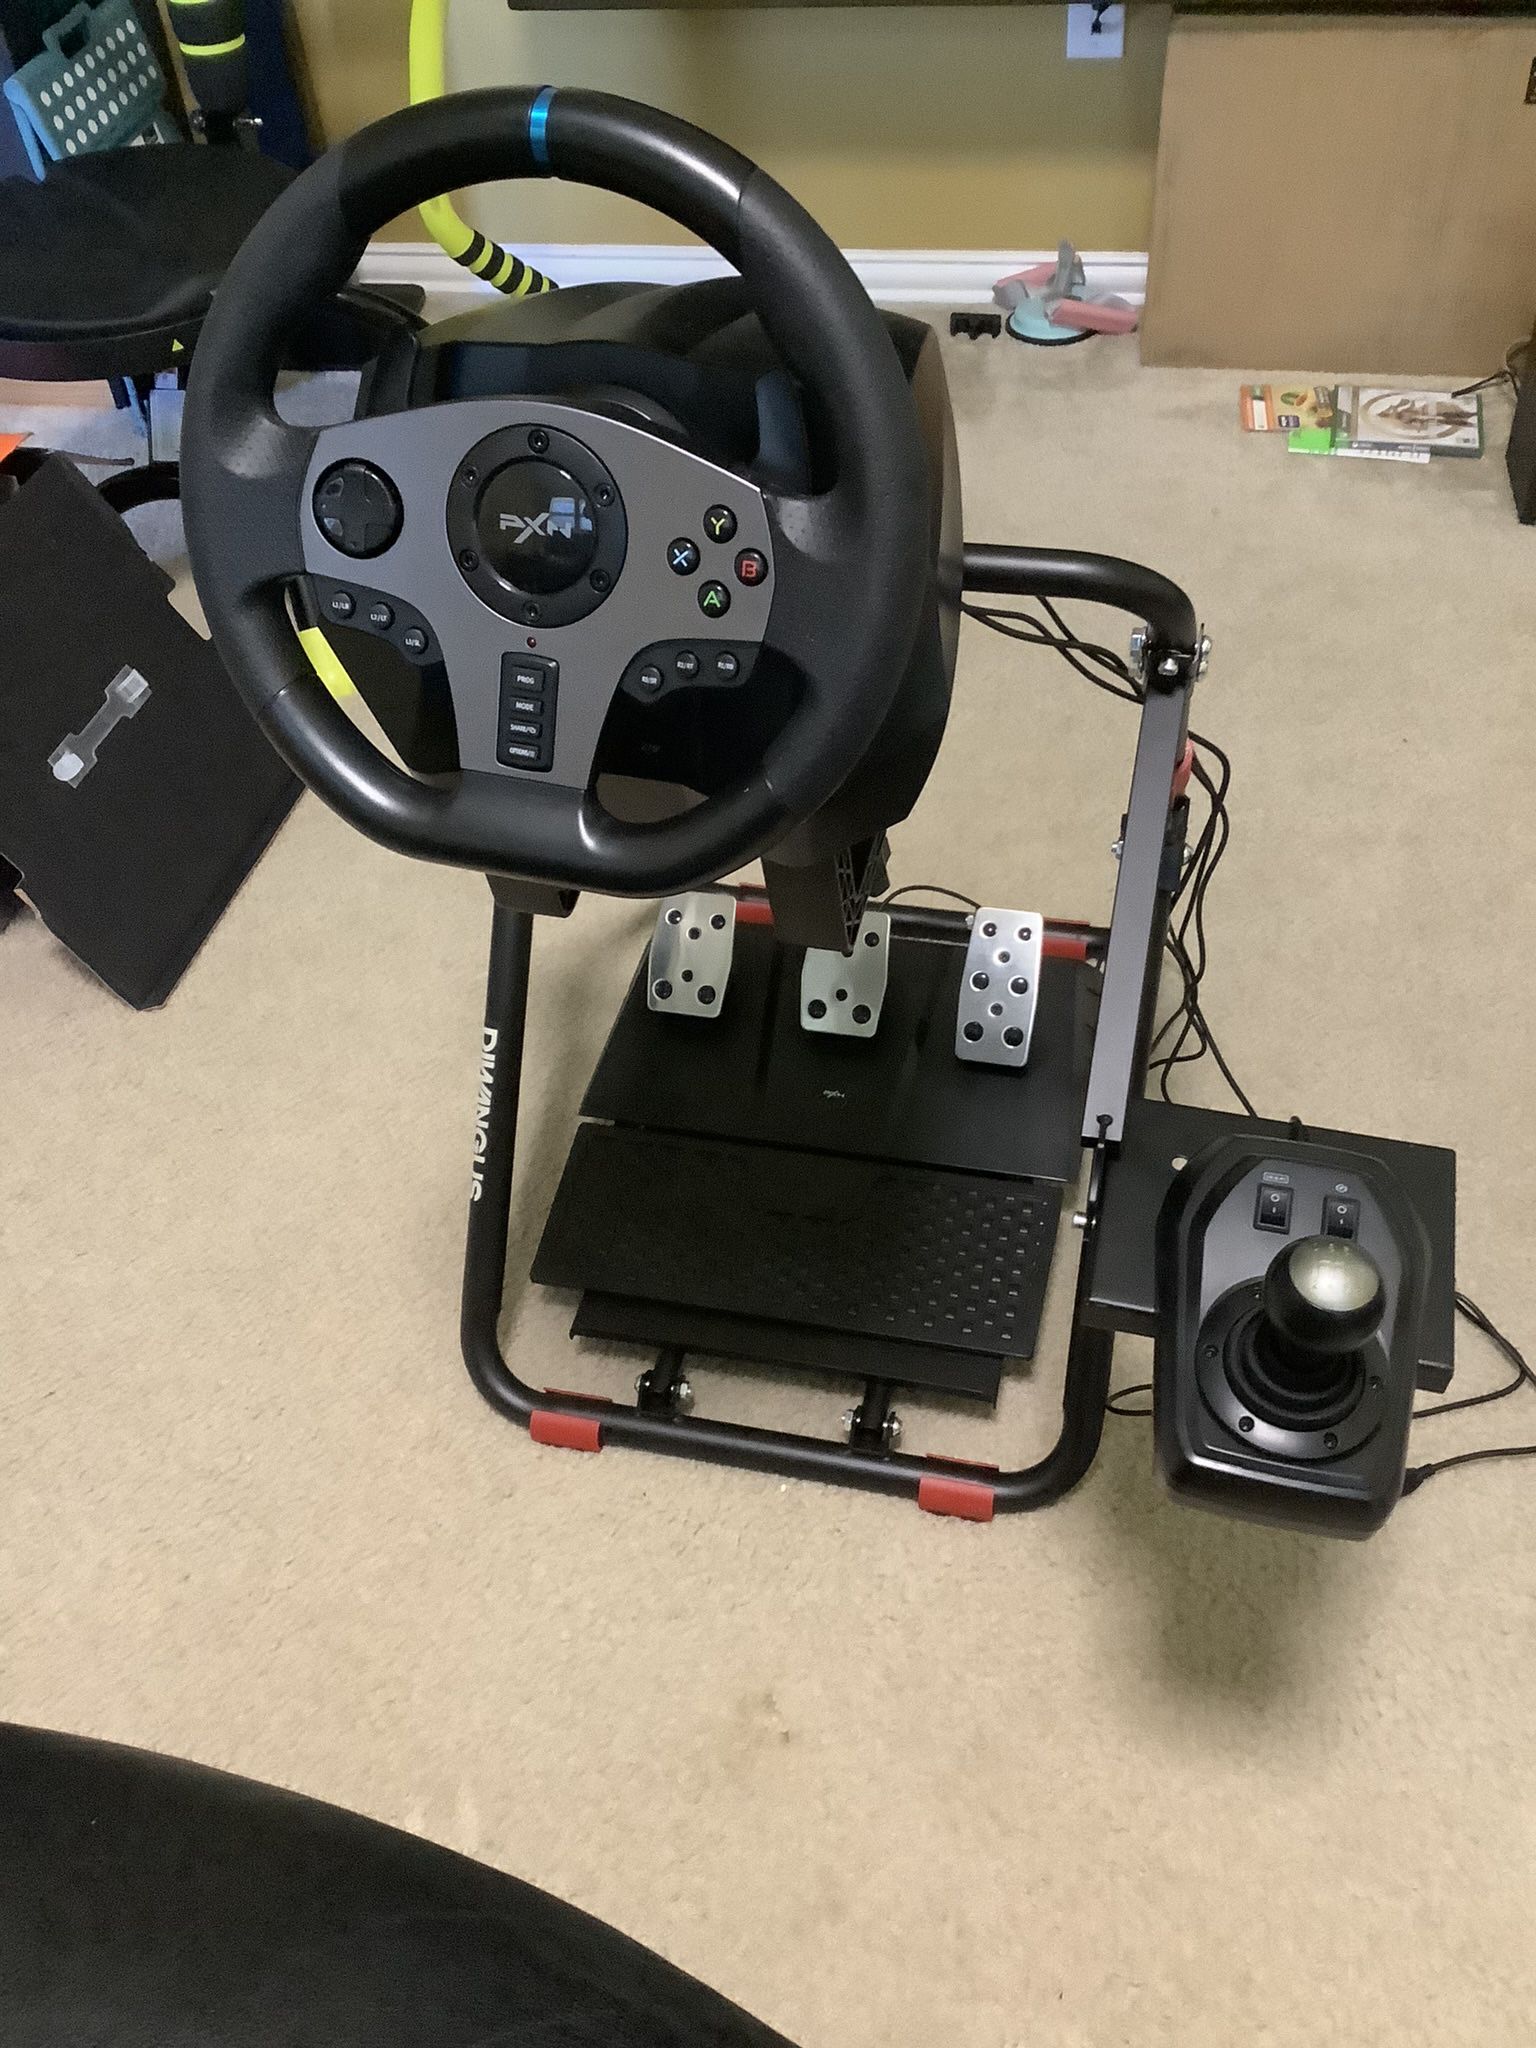 PXN V9 Gaming Racing Wheel with Pedals, Shifter and Folding Stand  $150 OBO For Everything